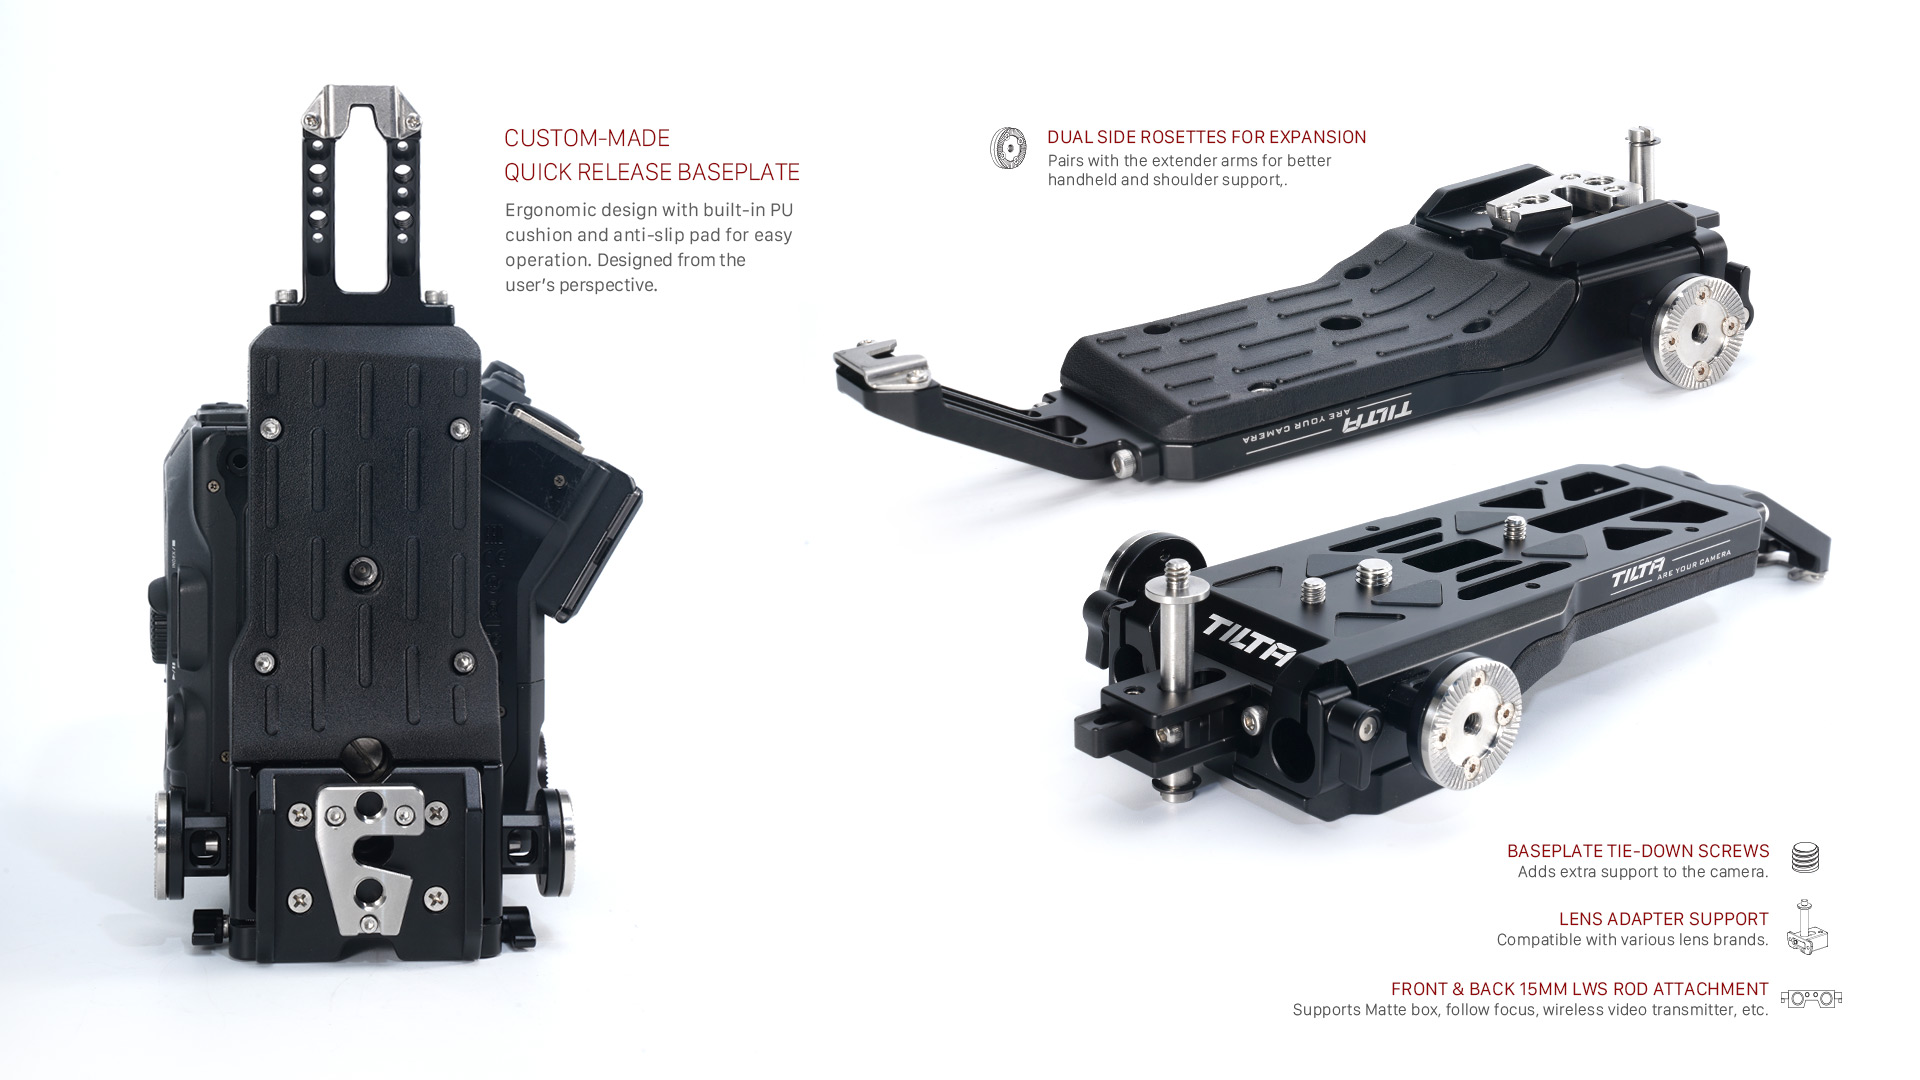 custom-made quick release baseplate + hardware features